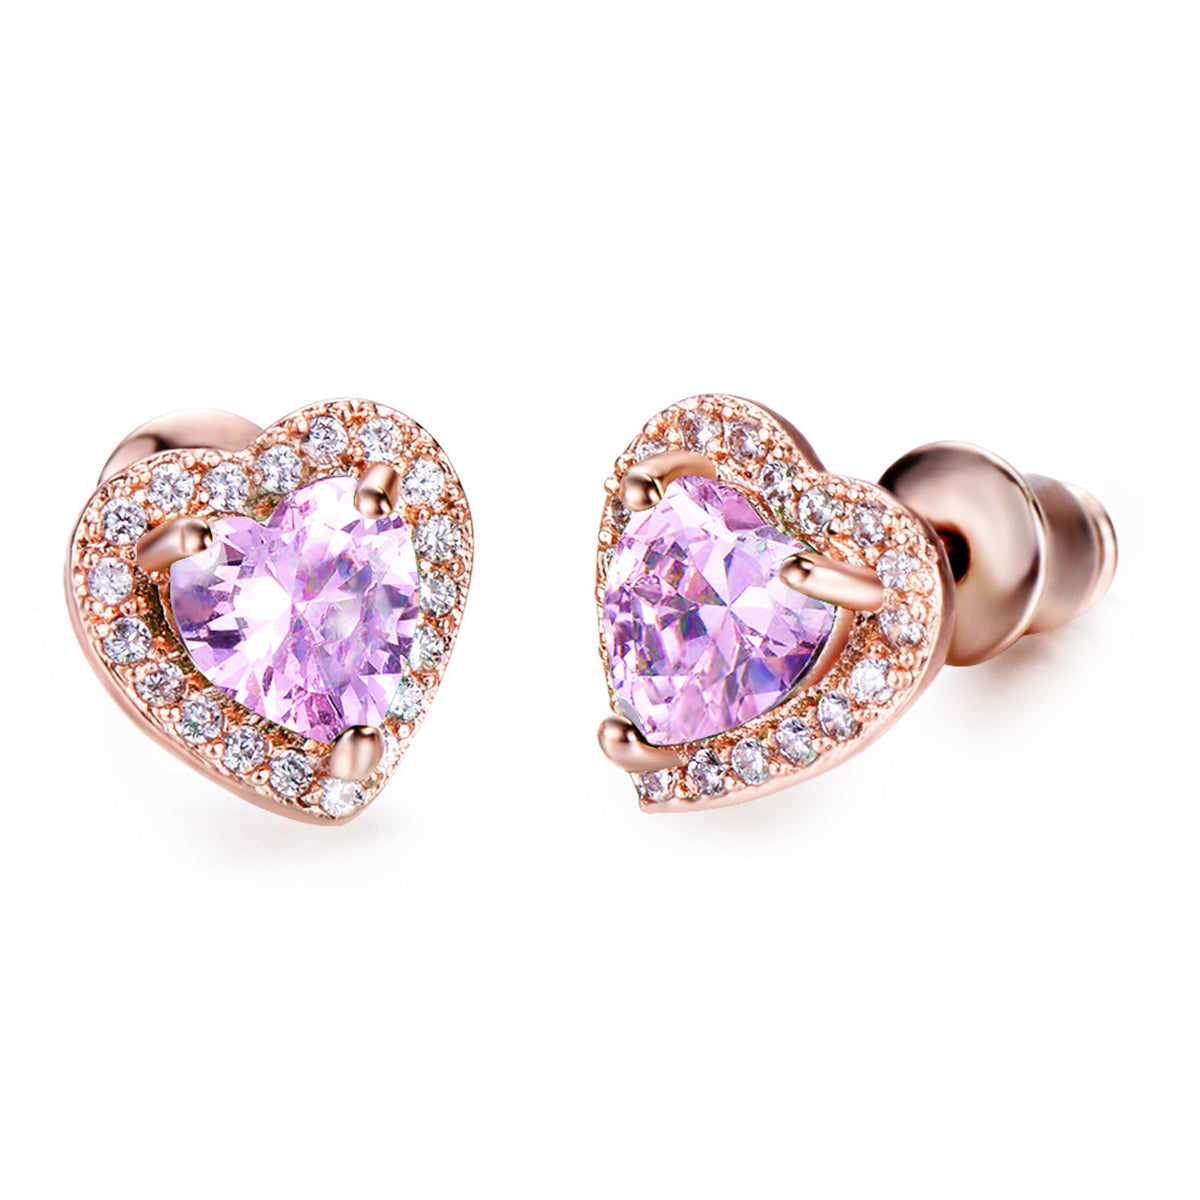 Pink Crystal & Cubic Zirconia 18K Rose Gold-Plated Halo Heart Stud Earrings